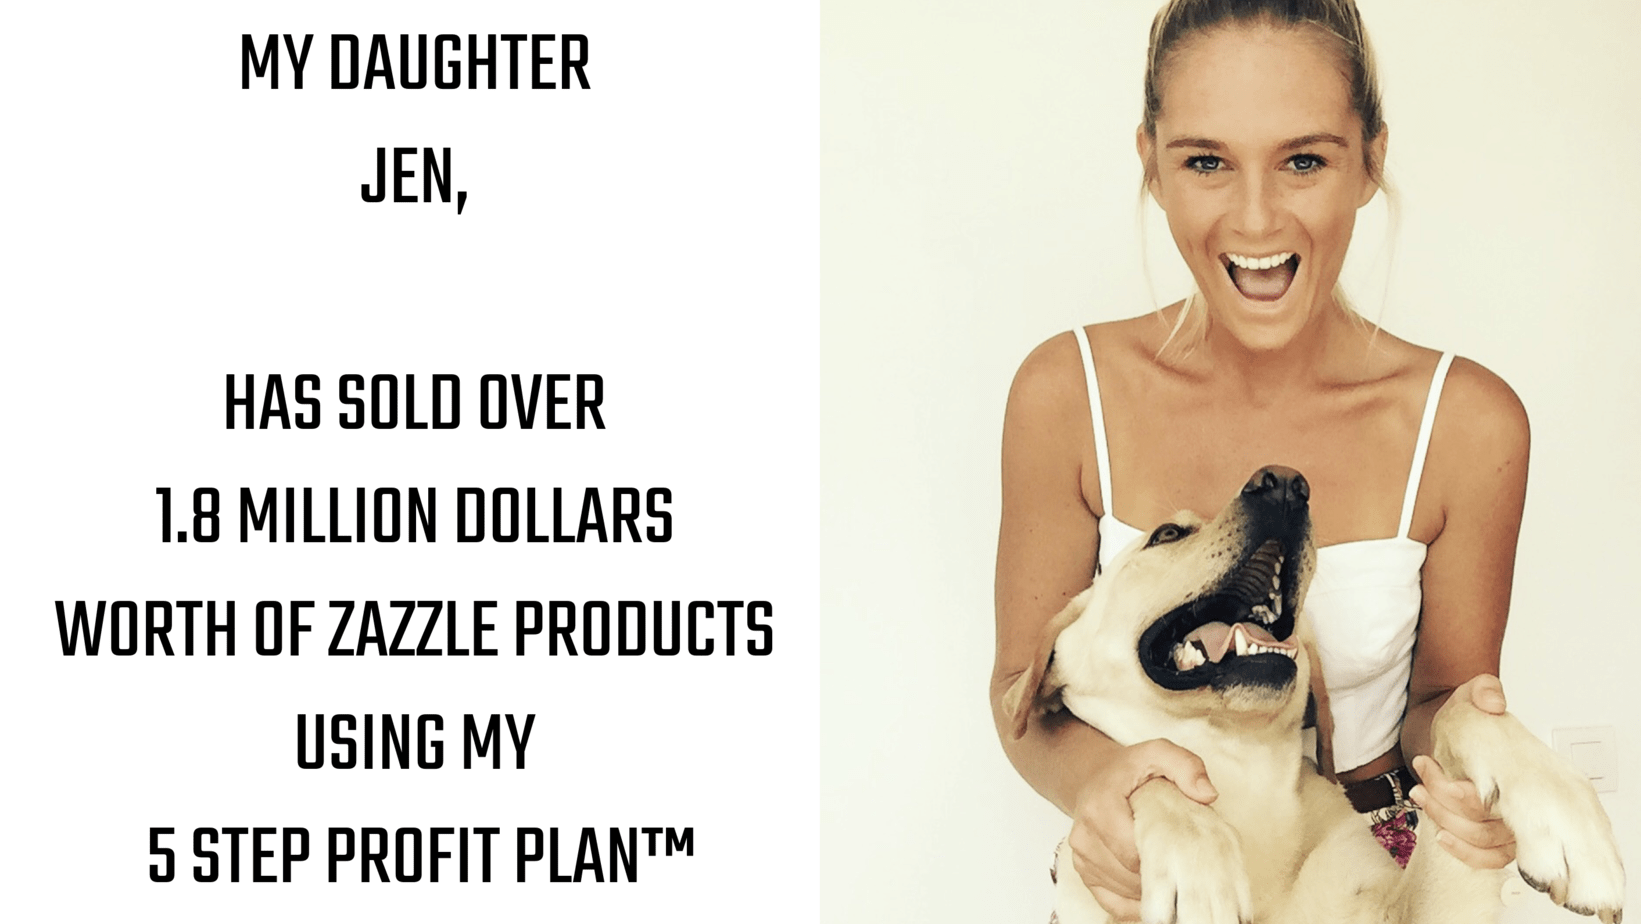 Jen Clarke used the 5 Step Profit Plan to become a Zazzle Million Dollar Seller